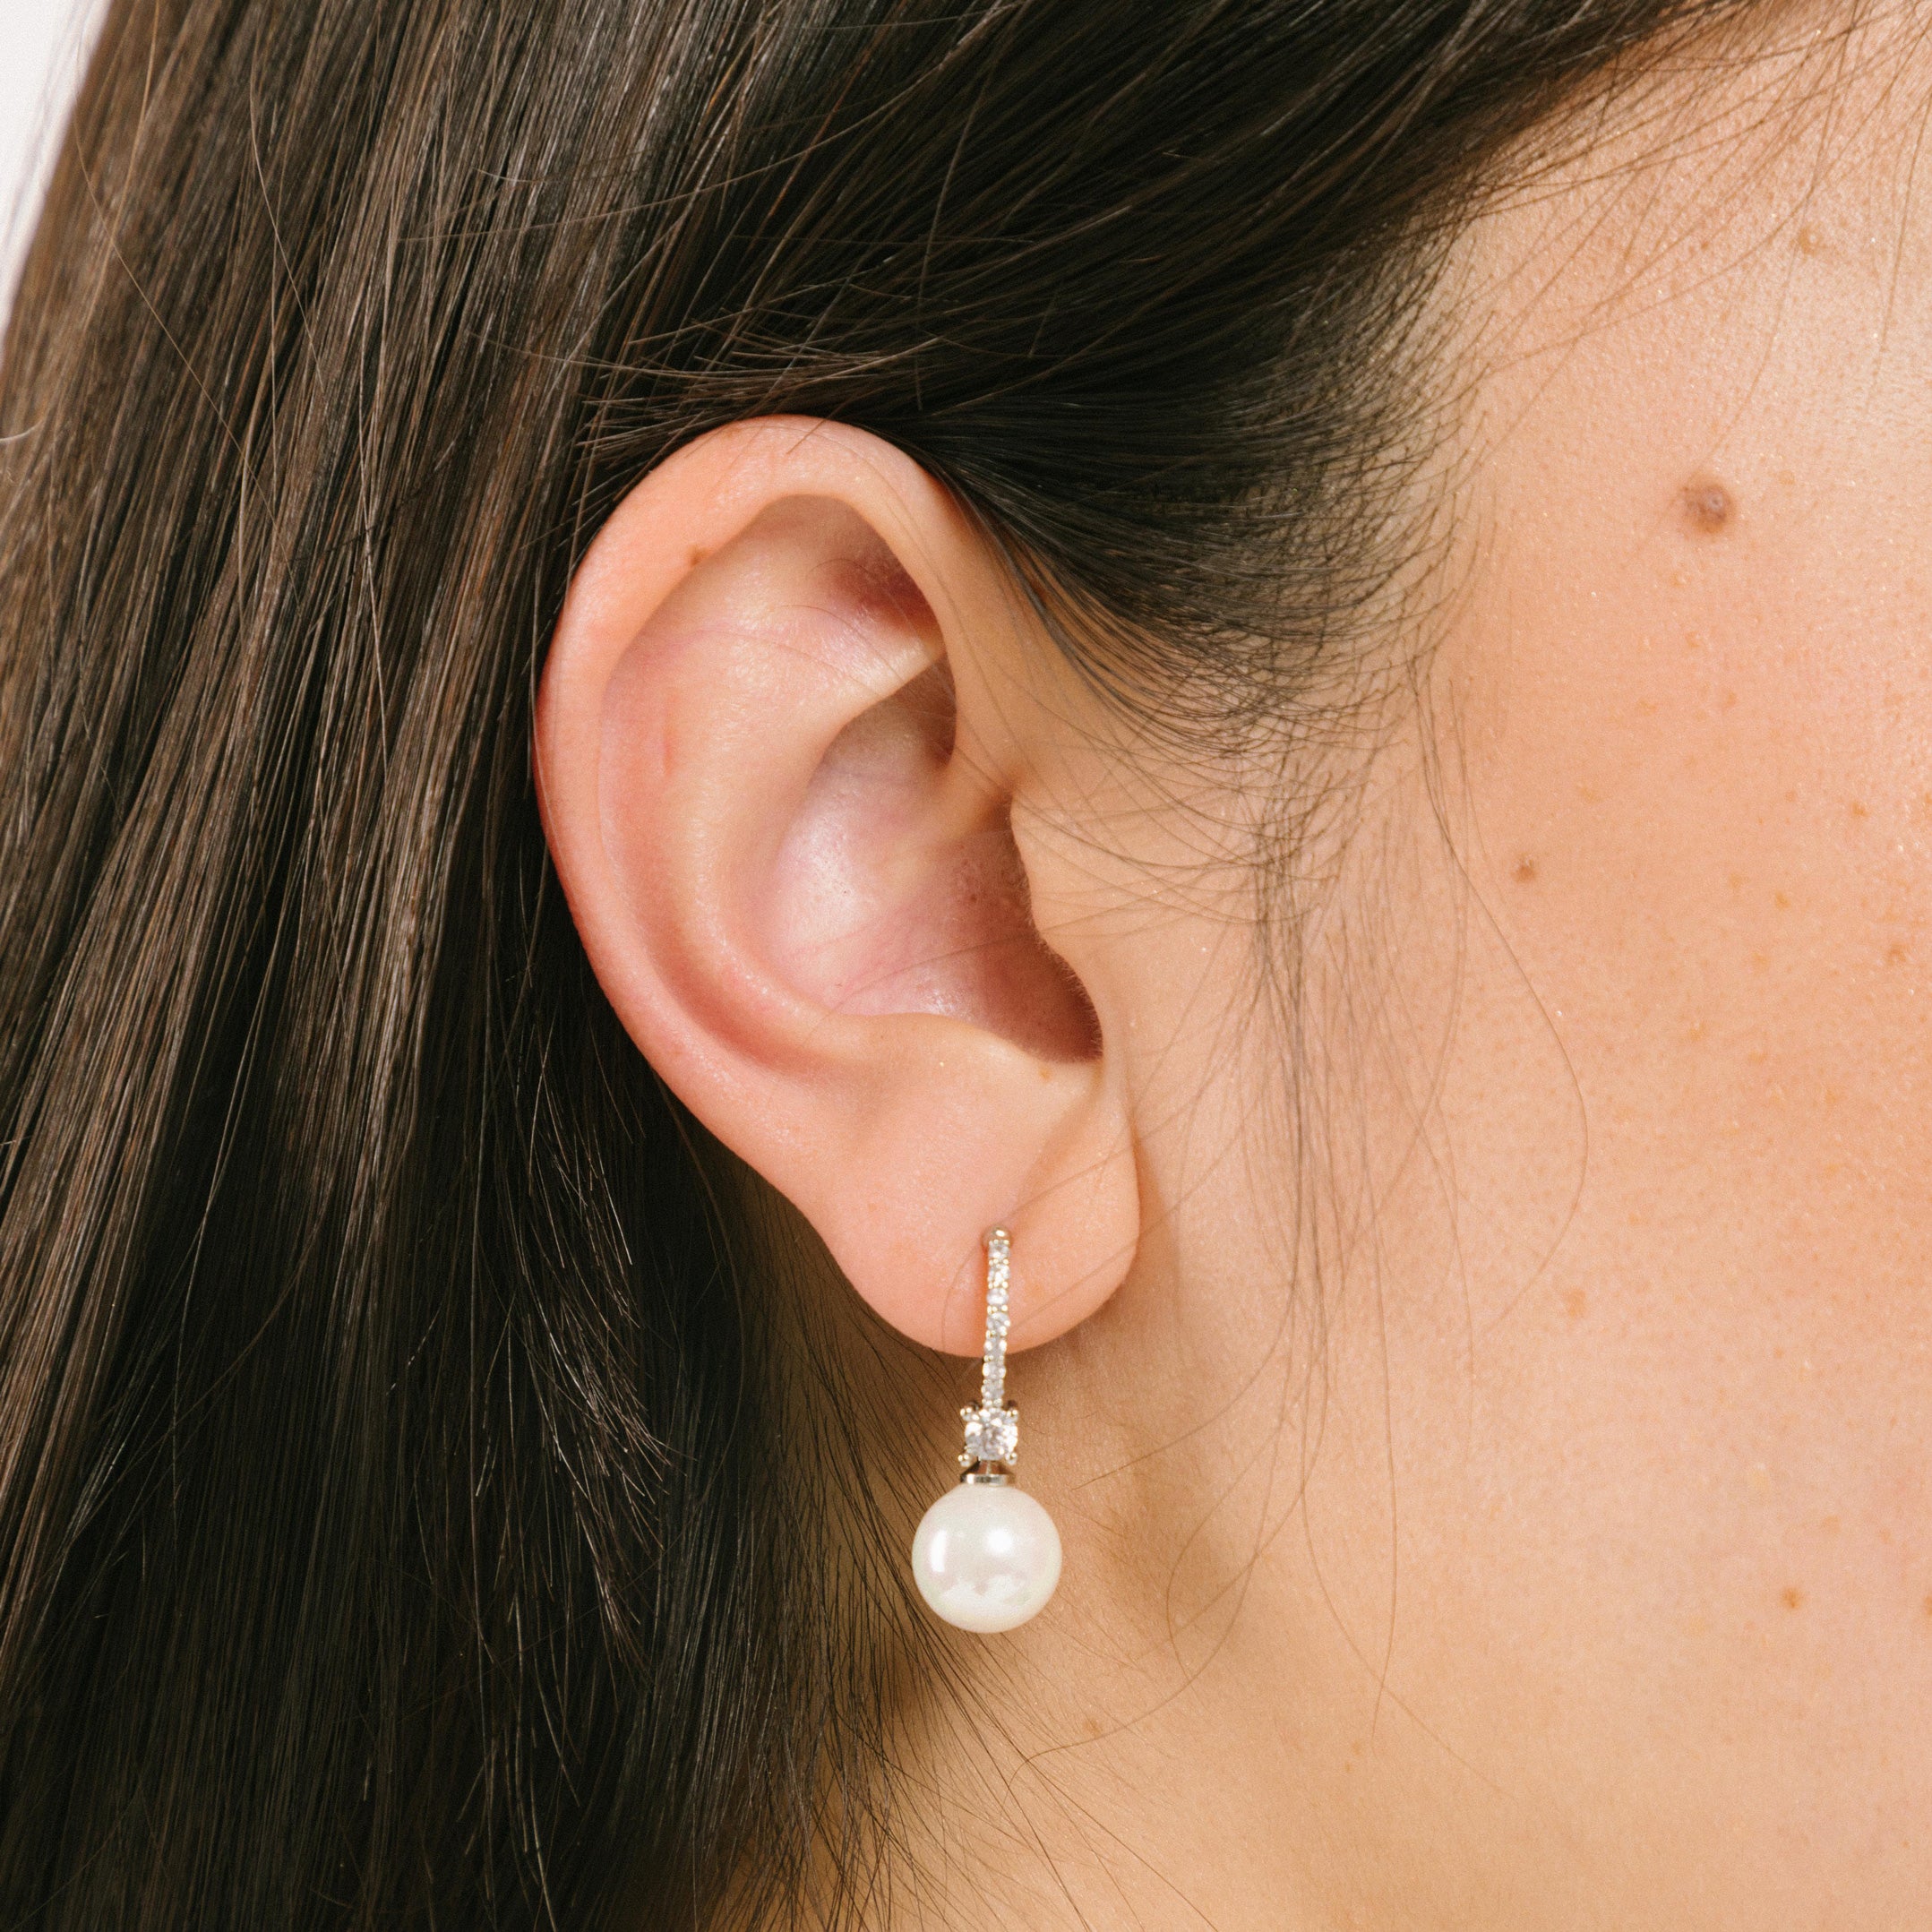 A model wearing the Claire Pearl Clip On Earrings in Silver present a mosquito coil clip-on closure crafted to accommodate all ear types—from thick/large to sensitive, from small/thin to stretched/healing—ensuring a comfortable fit. Intricately constructed from silver tone copper alloy, Cubic Zirconia, and Simulated Faux Pearl, these earrings add a sophisticated touch to any ensemble.